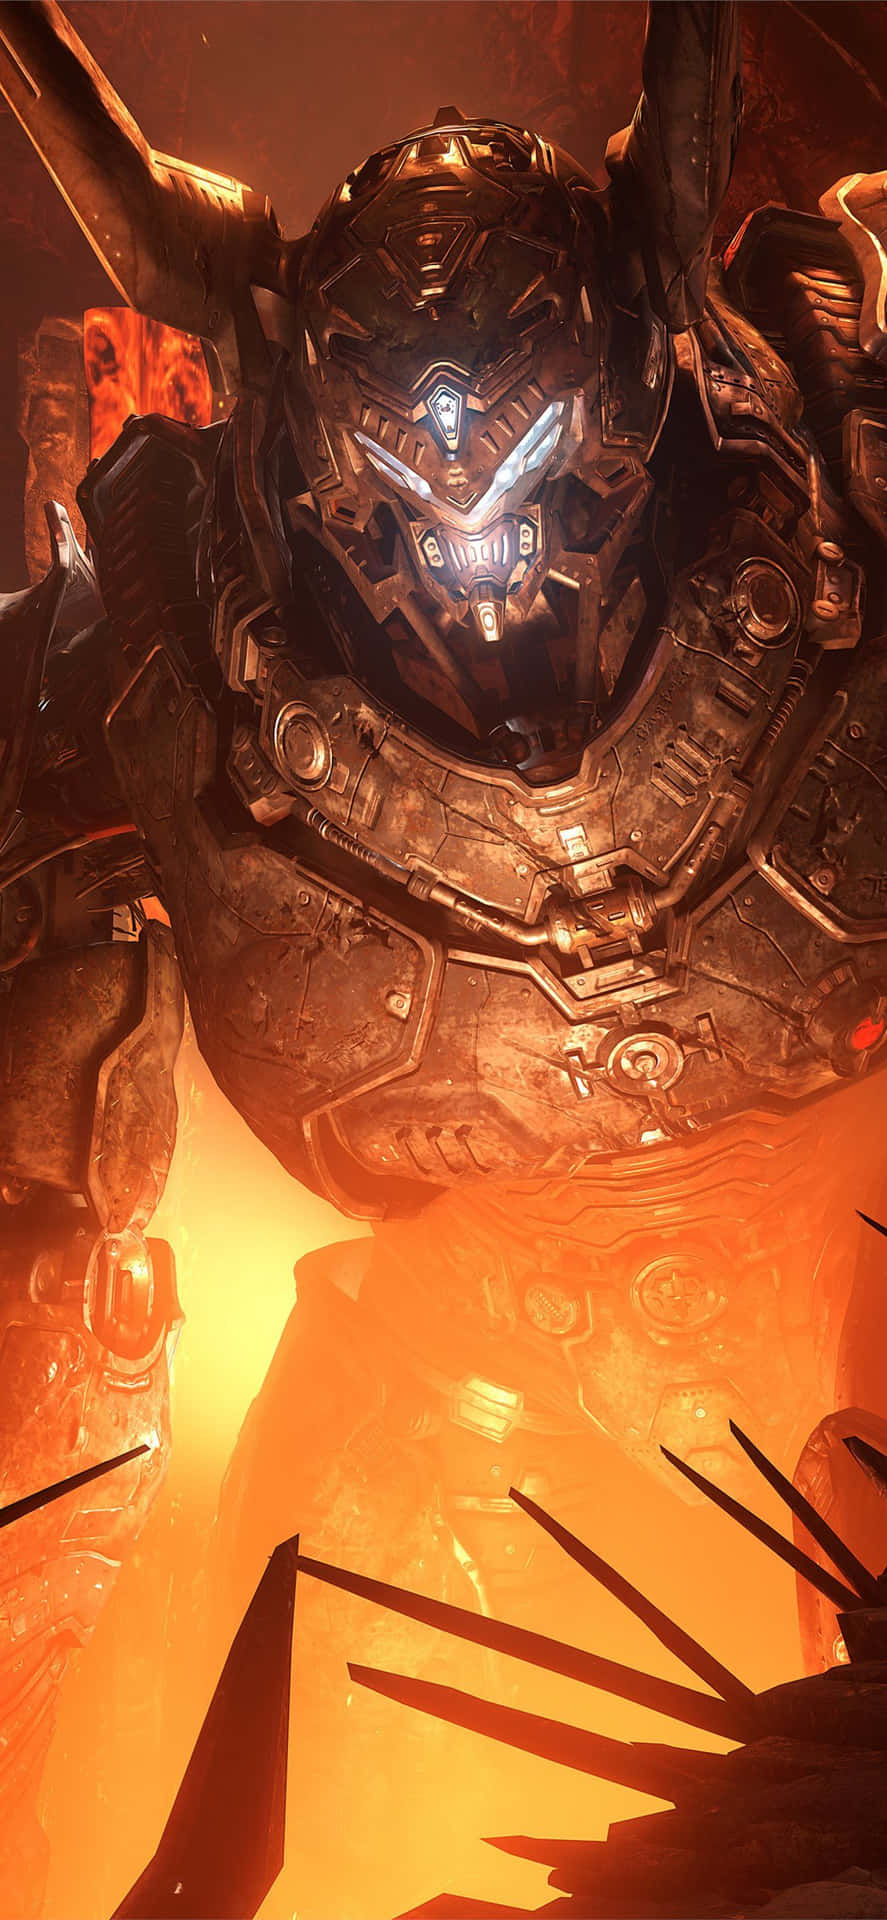 A Large Robot With Horns In Front Of A Fire Background